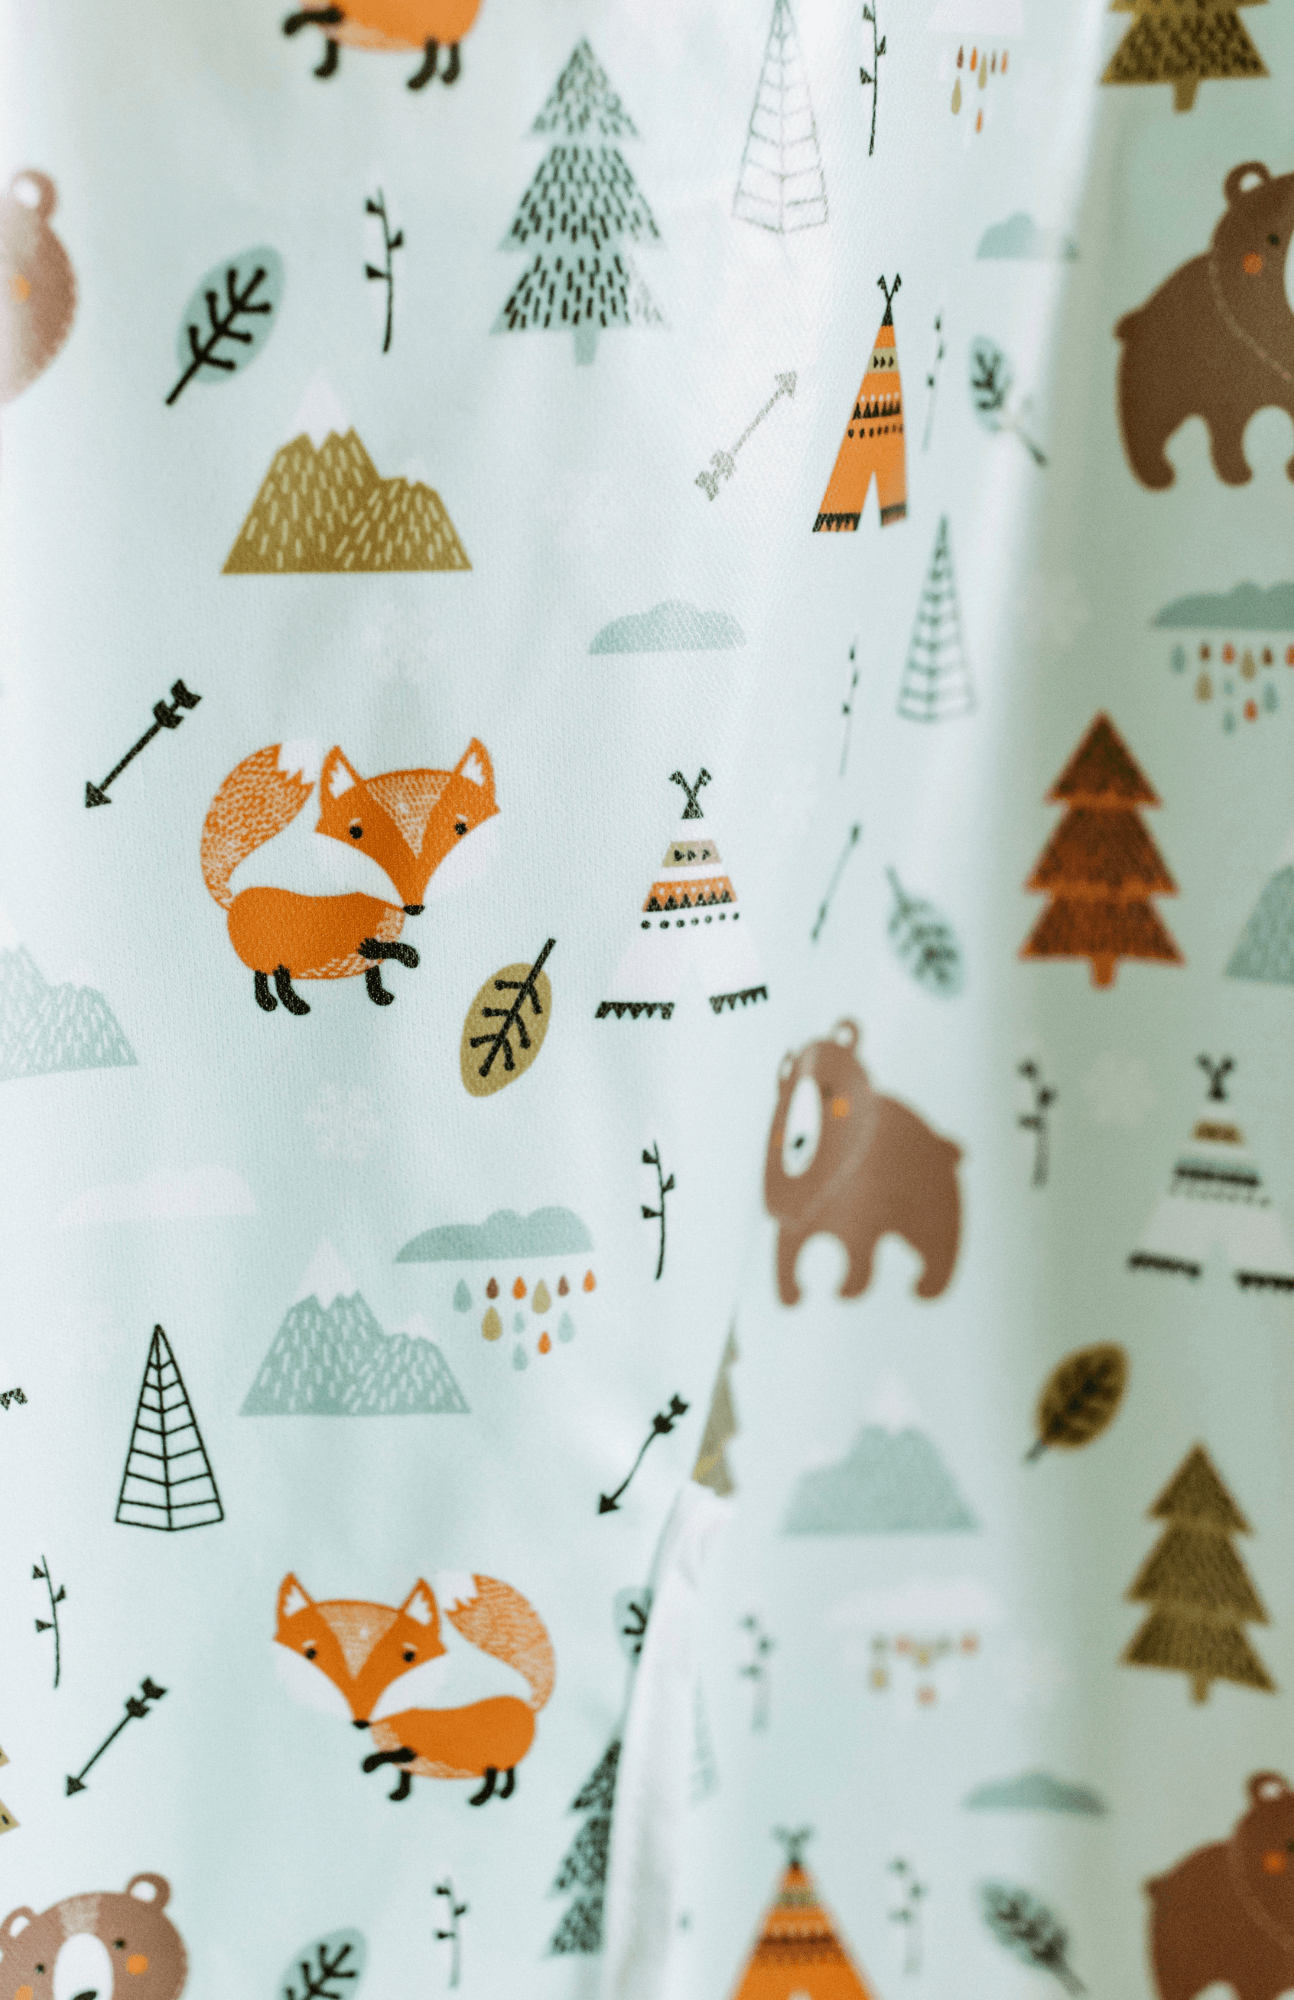 Close-up view of the Bibvy bib featuring the 'Wilderness Wonder' print with foxes, bears, and teepees.